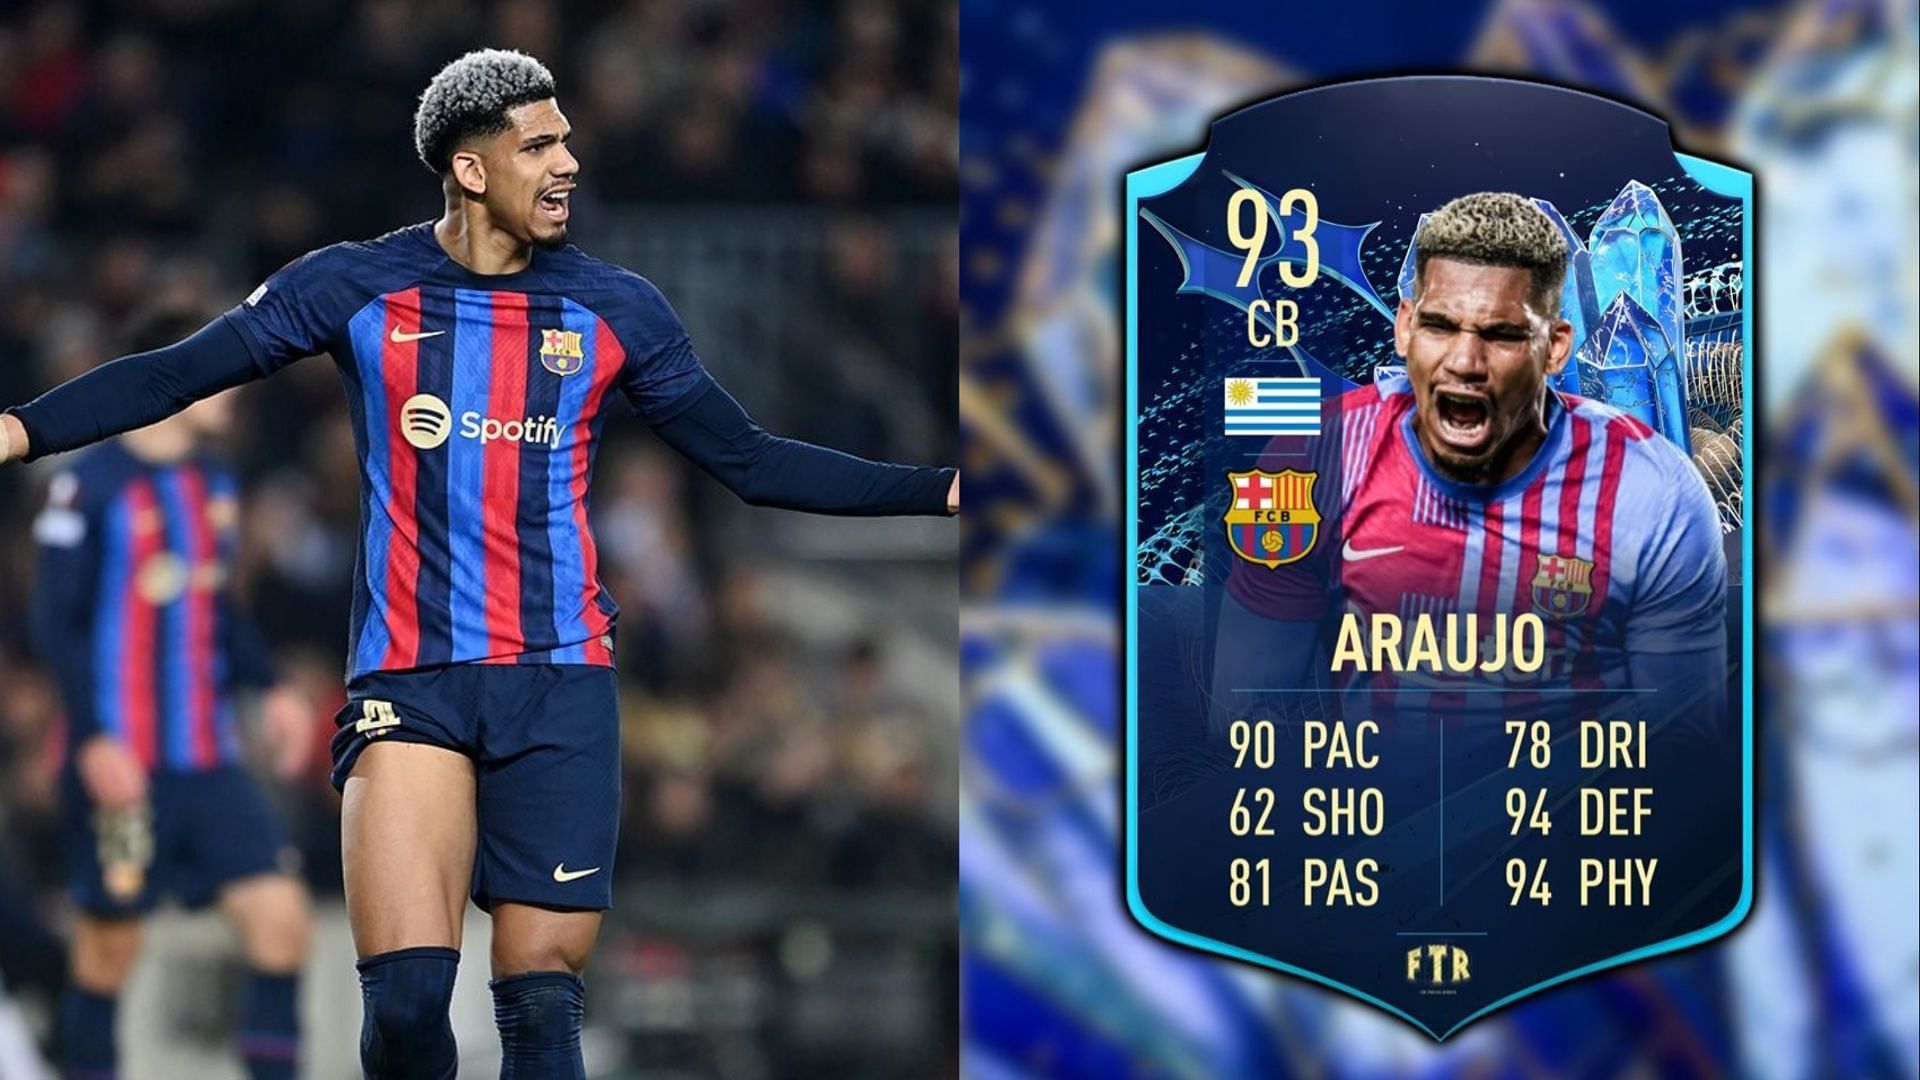 FIFA 23 players could hugely profit from Ronald Araujo&rsquo;s Community TOTS Moments card (Images via Getty, Twitter/FTR)